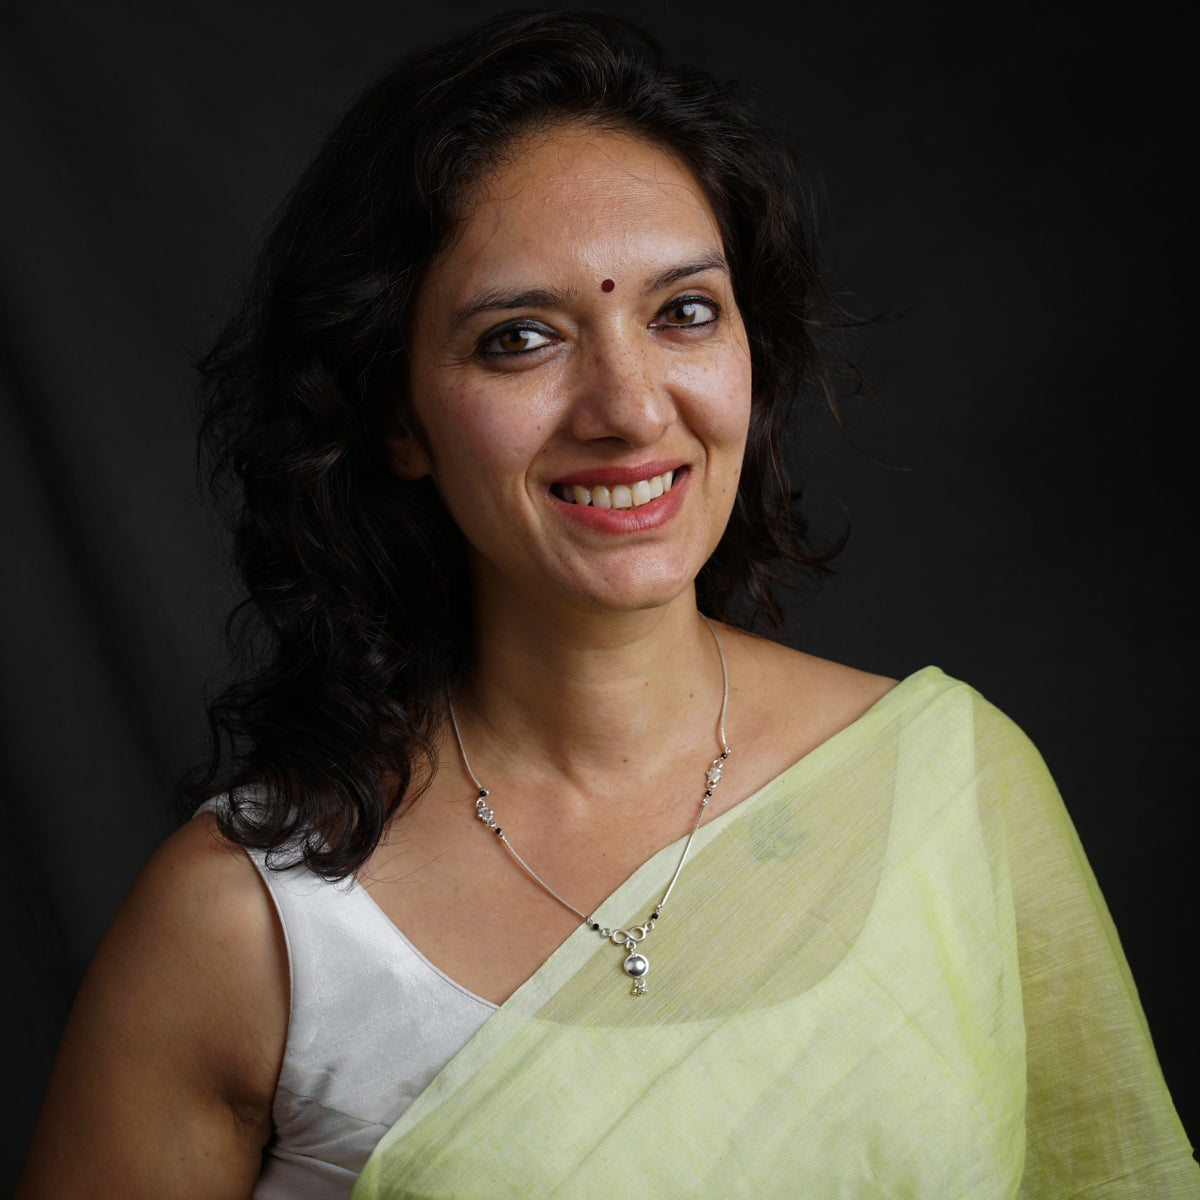 a woman in a sari smiling for the camera